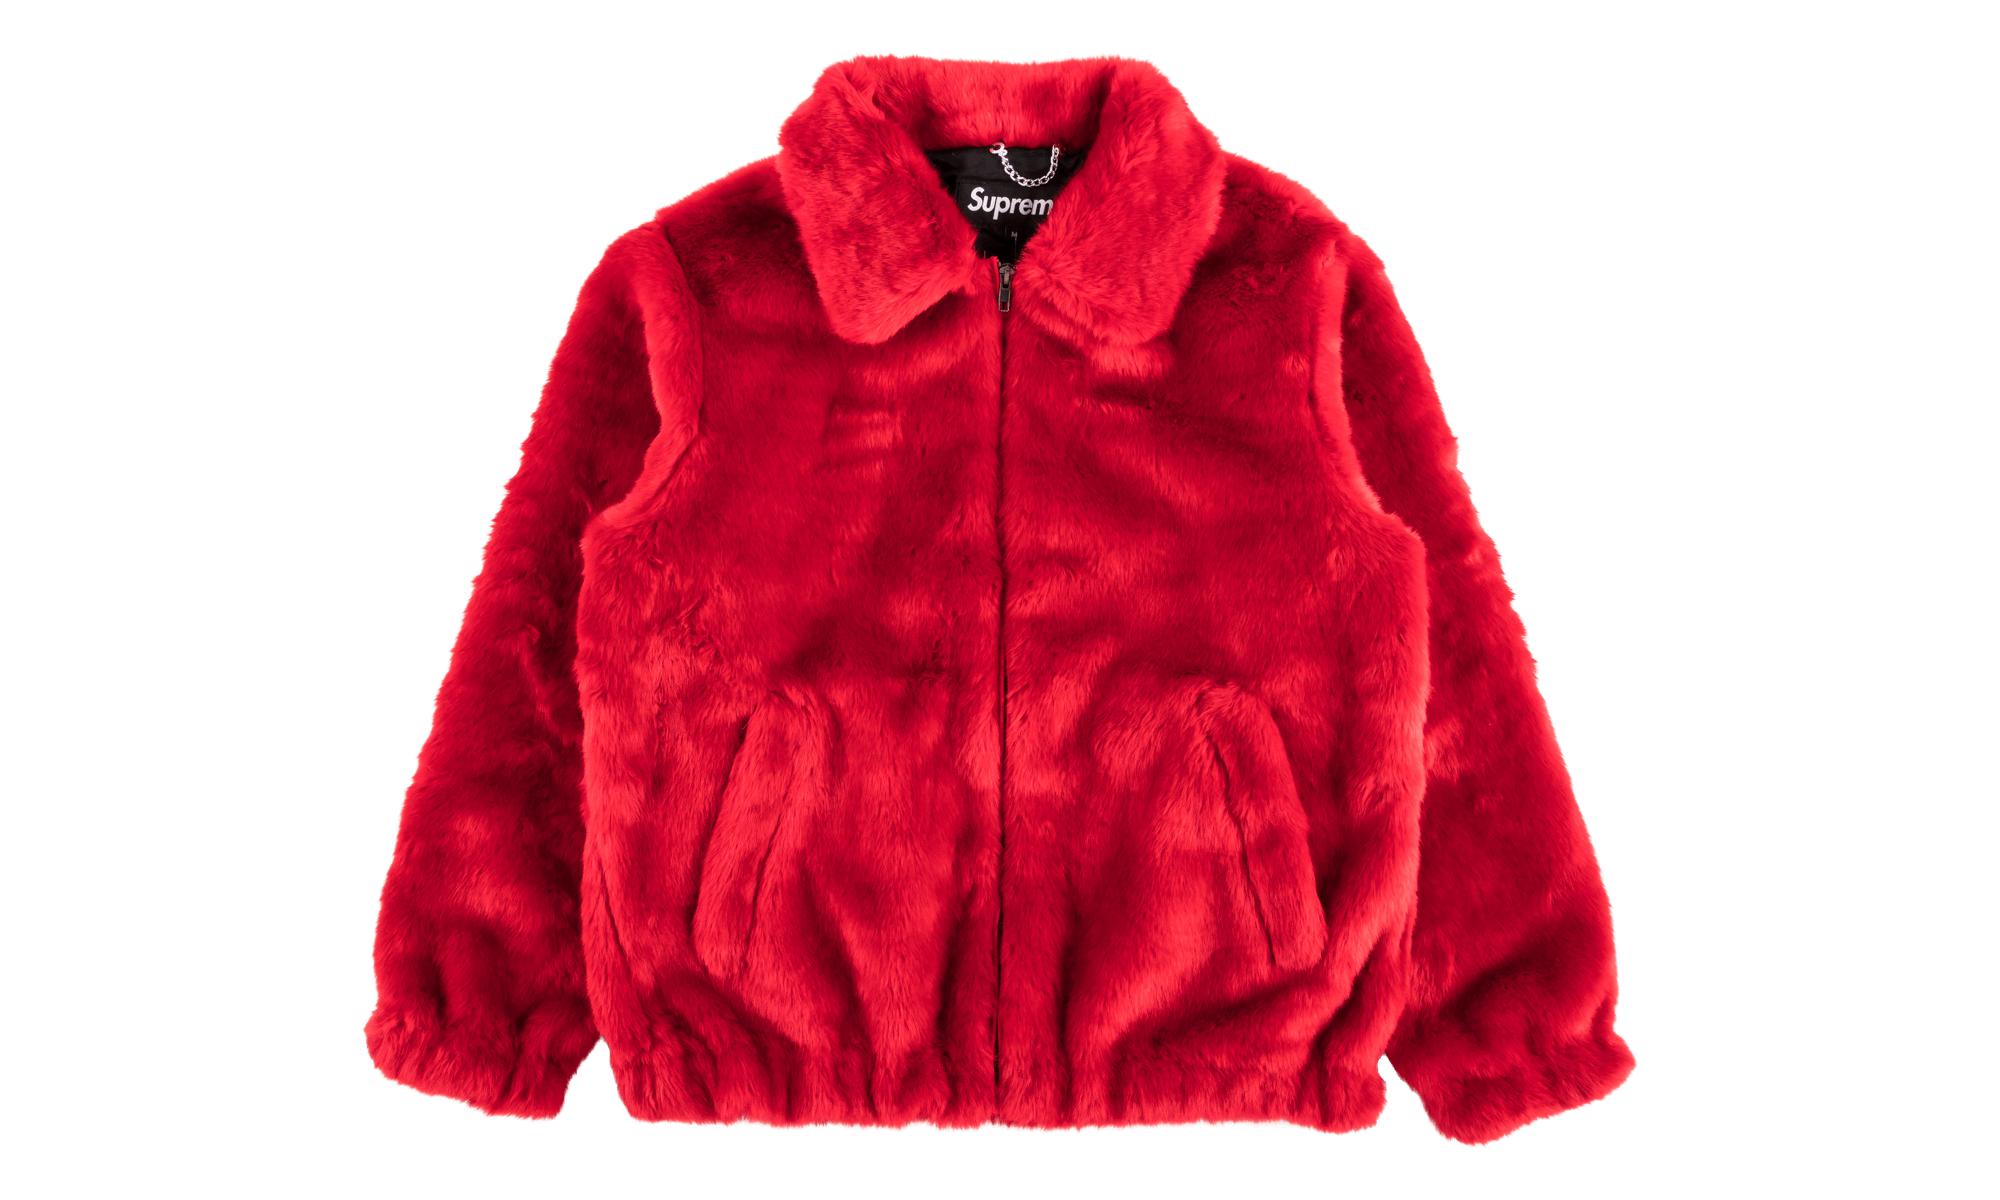 Supreme Faux Fur Bomber Jacket in Red - Lyst